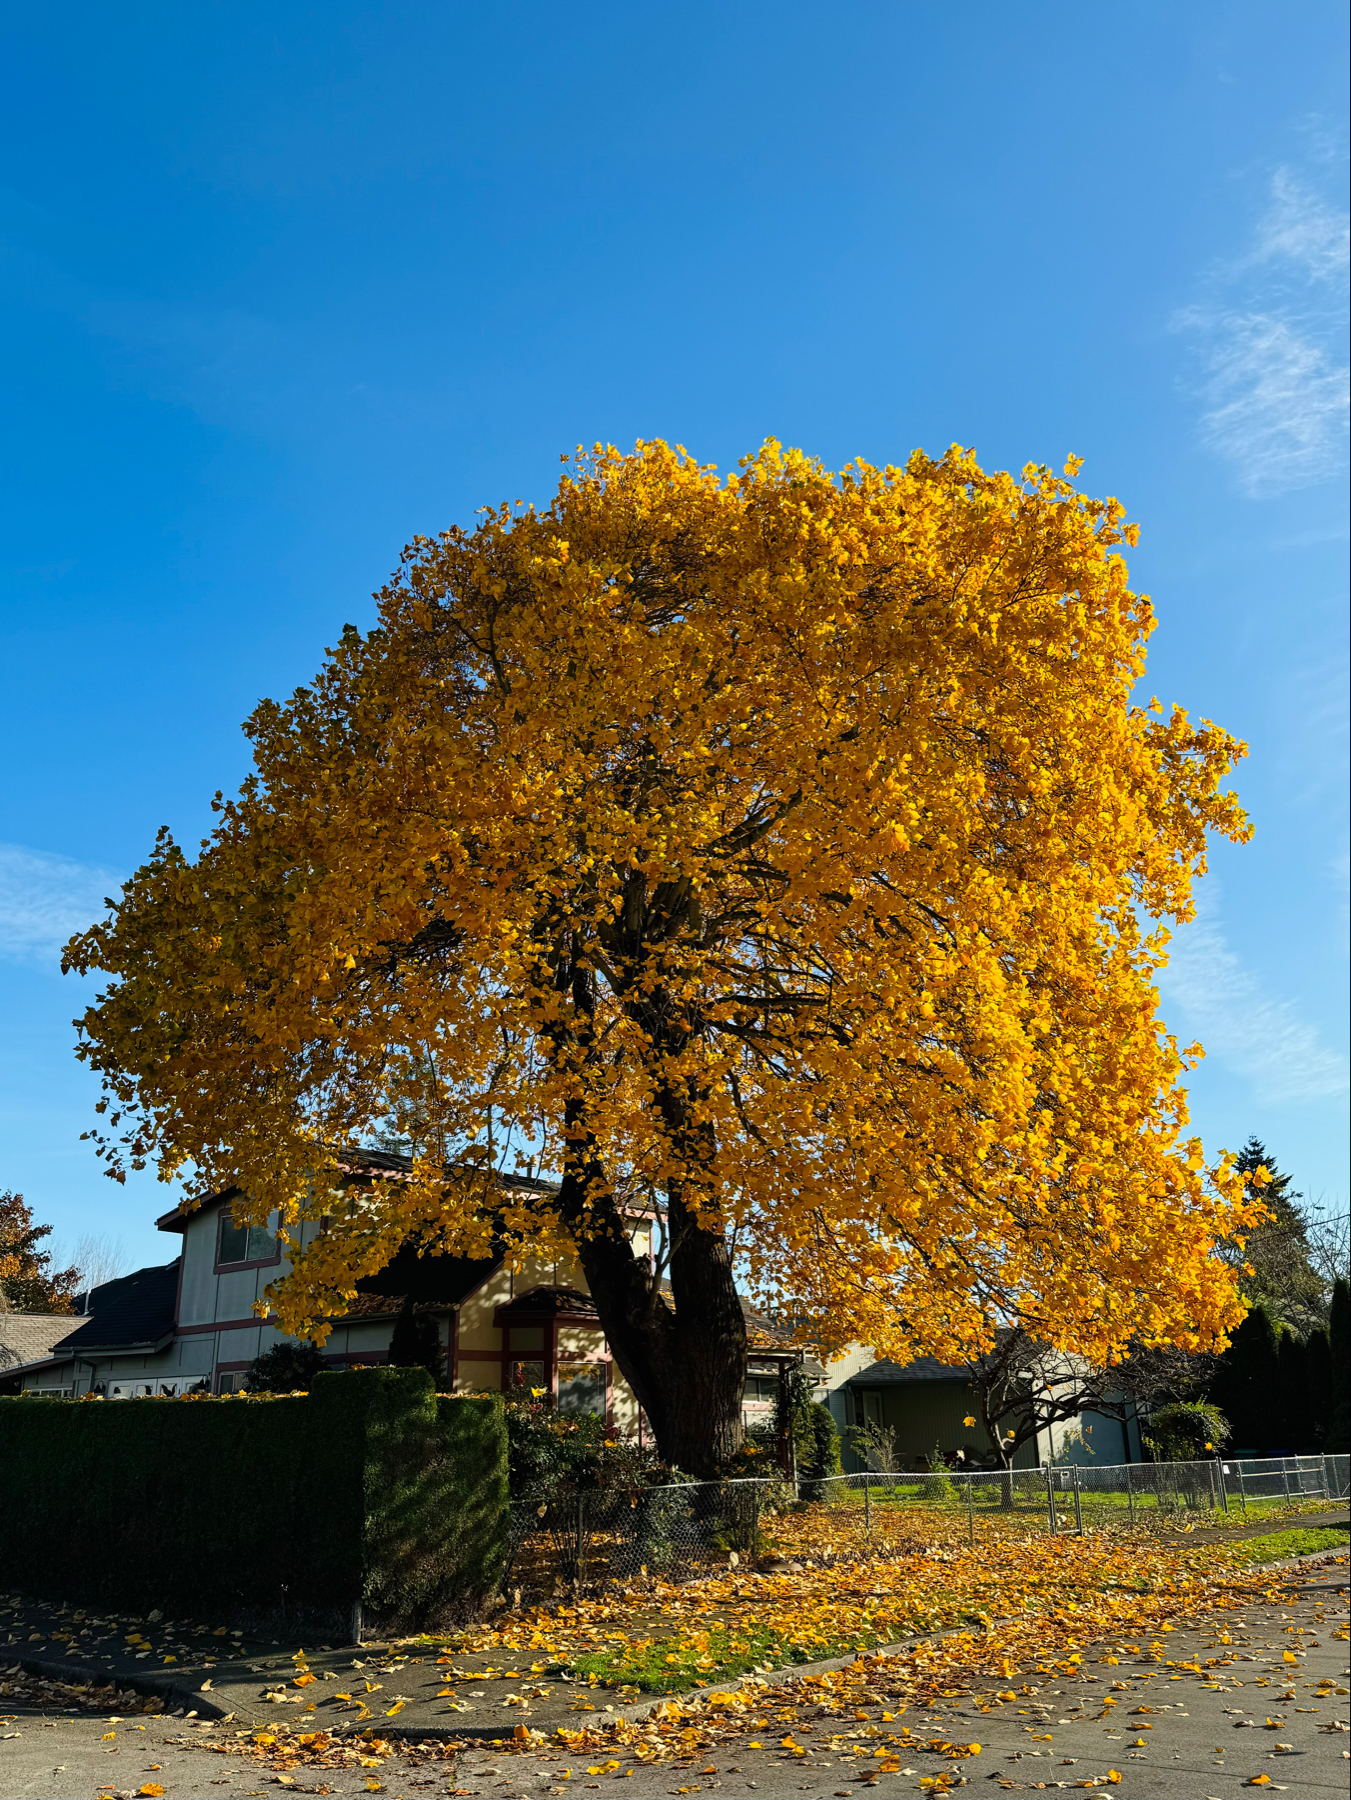 A tree that’s over twice as tall as the house next to it with a wide canopy of bright yellow leaves and many fallen yellow leaves below.